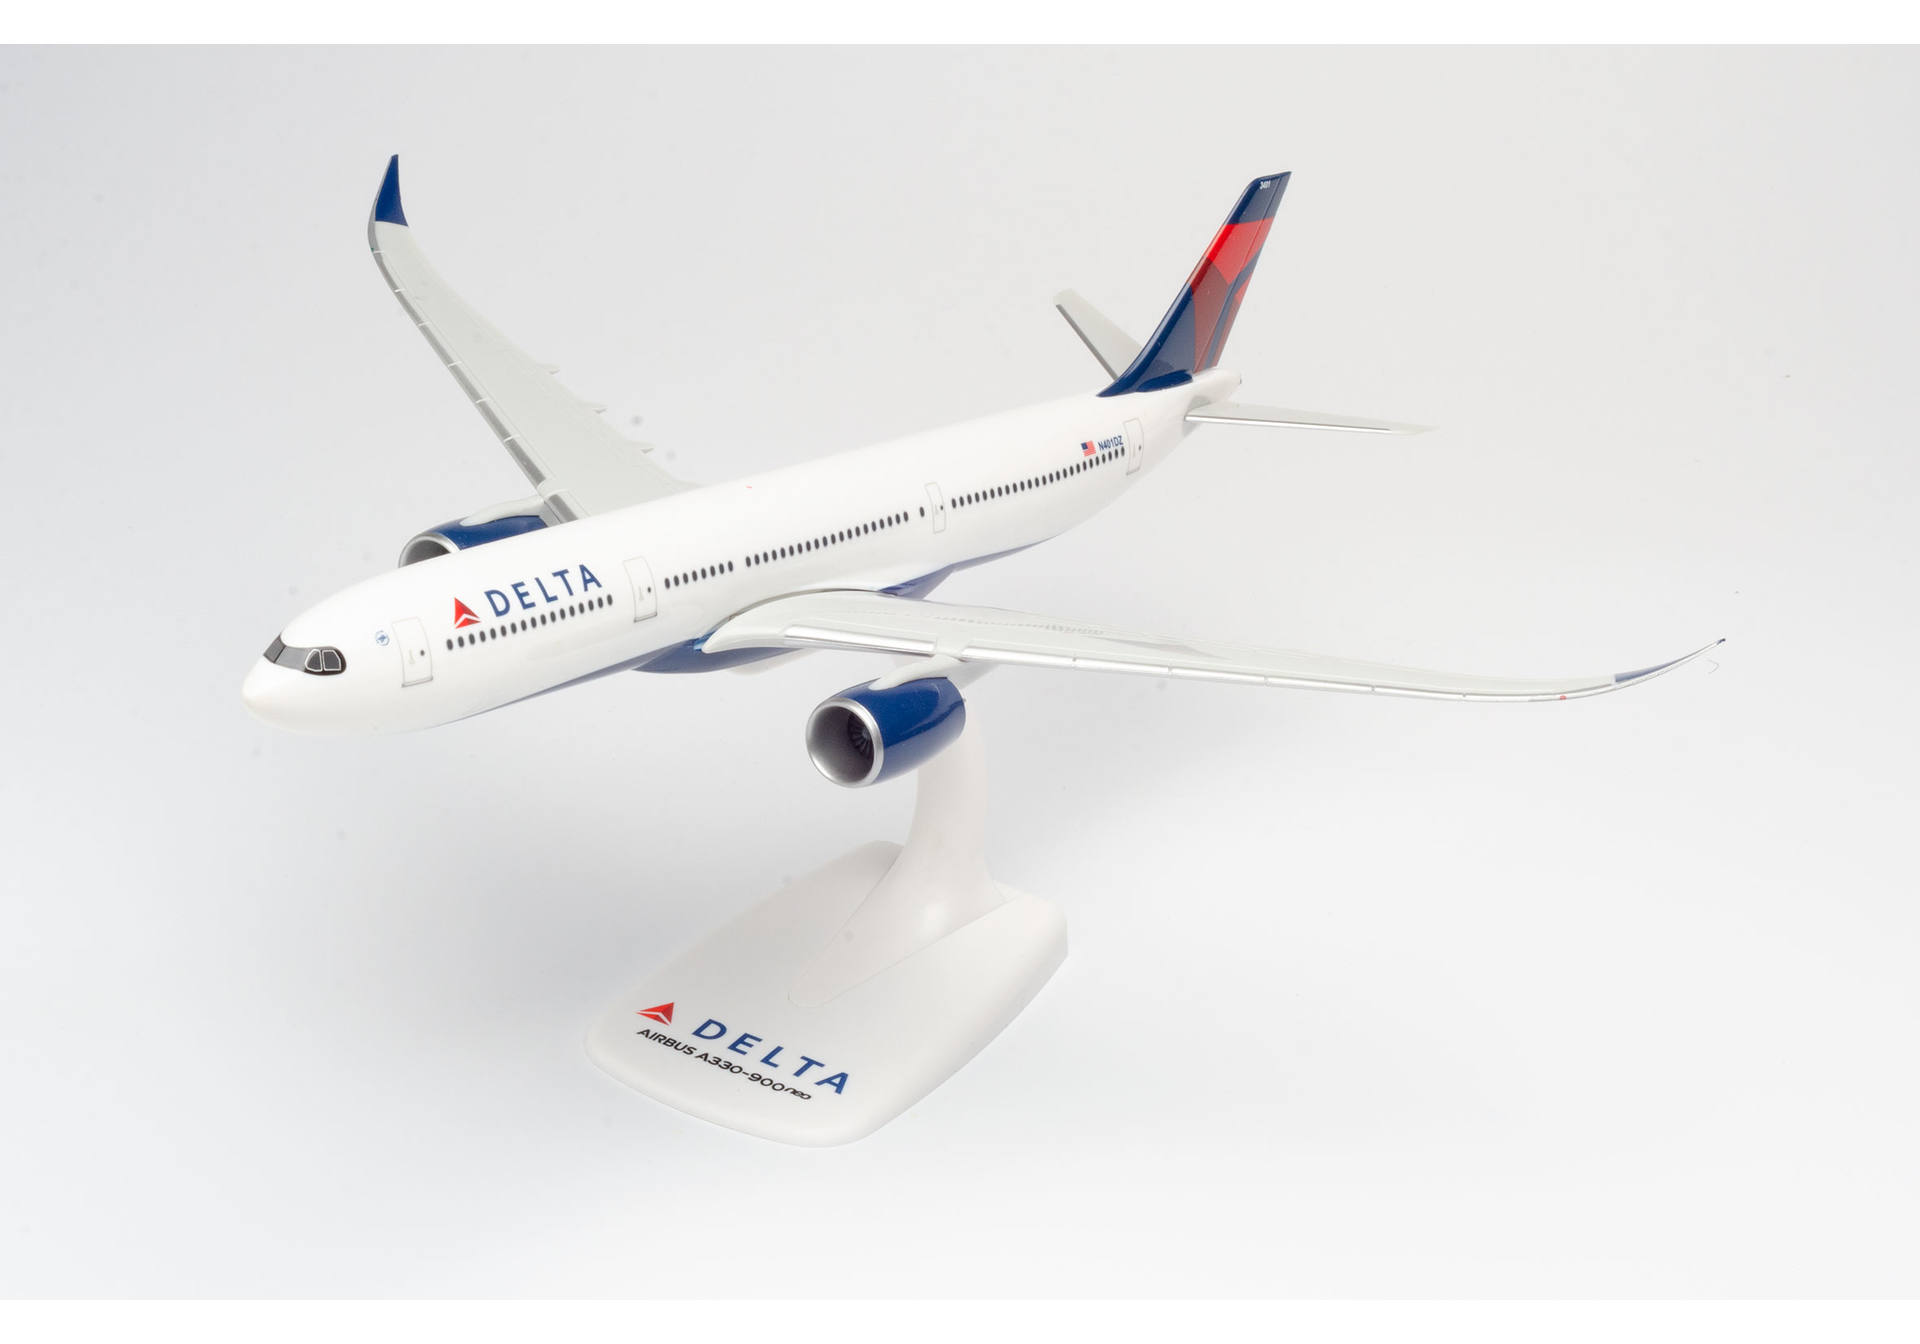 Delta Air Lines Airbus A330-900 neo